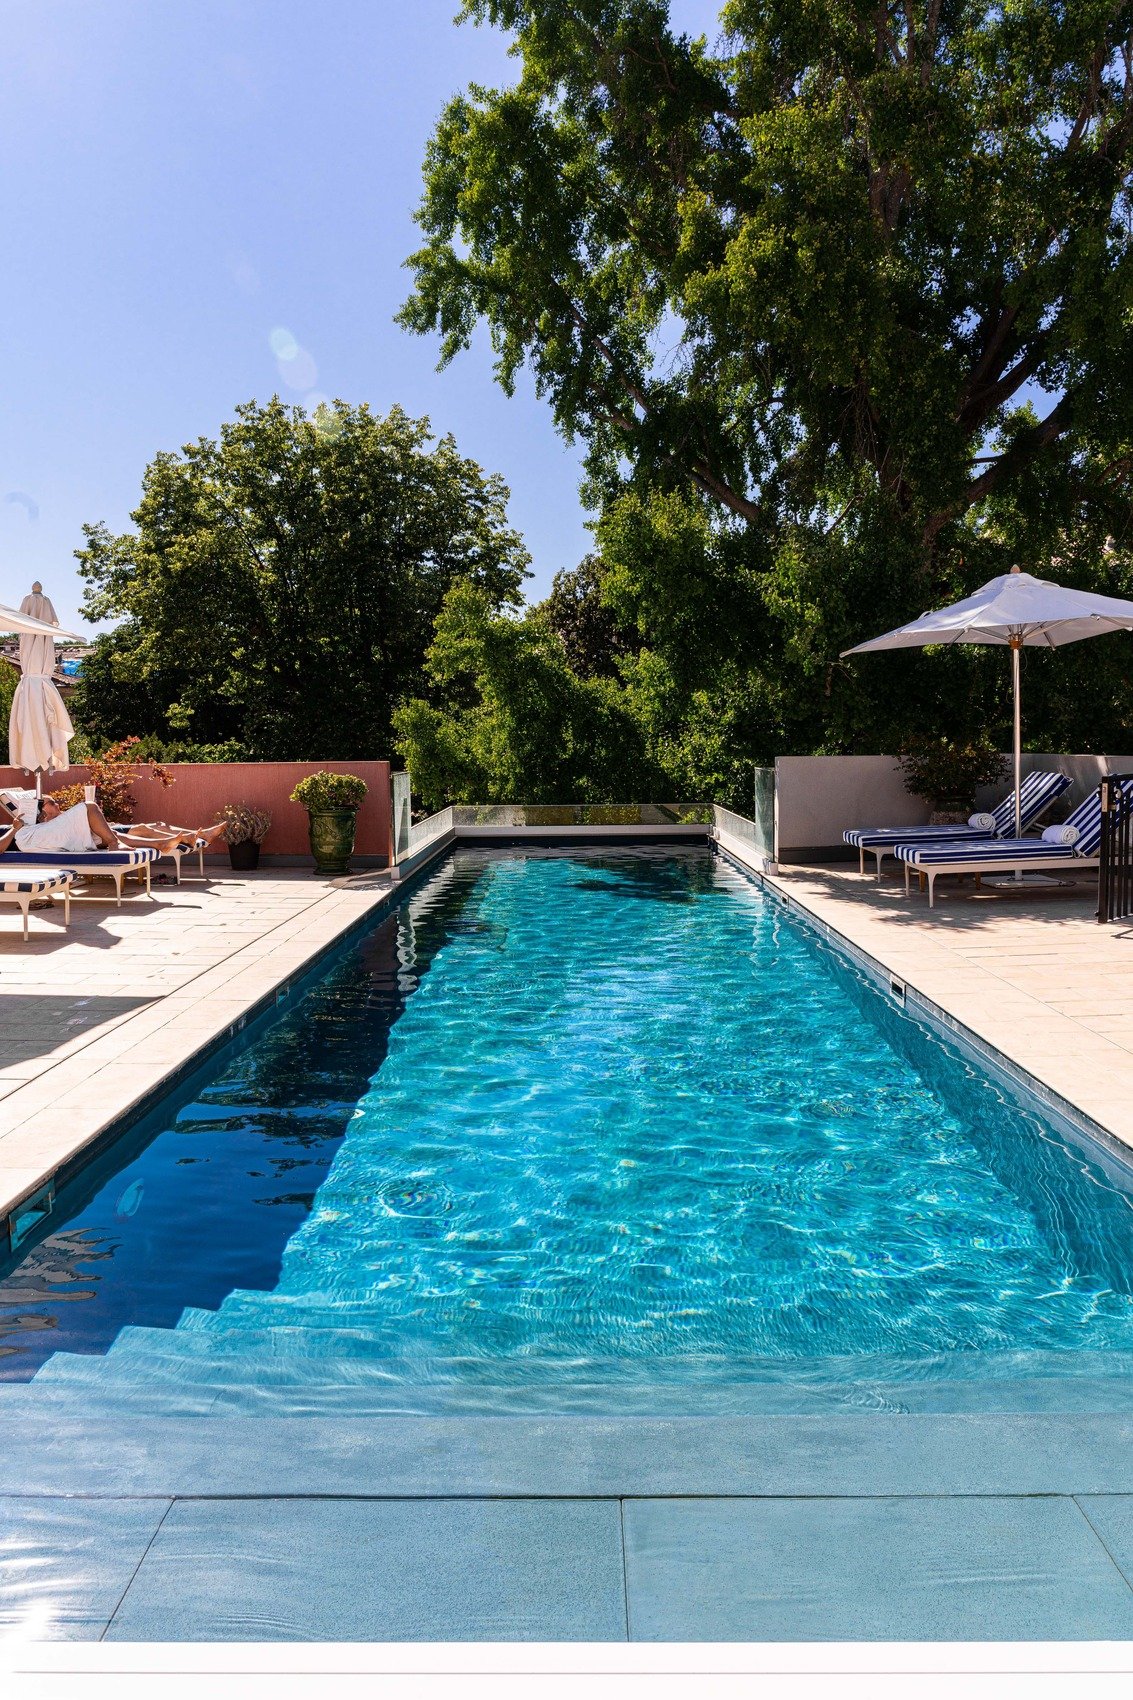 Luxury boutique hotel Nîmes Maison Albar Hotels L'Imperator 5* hotel with swimming pool garden